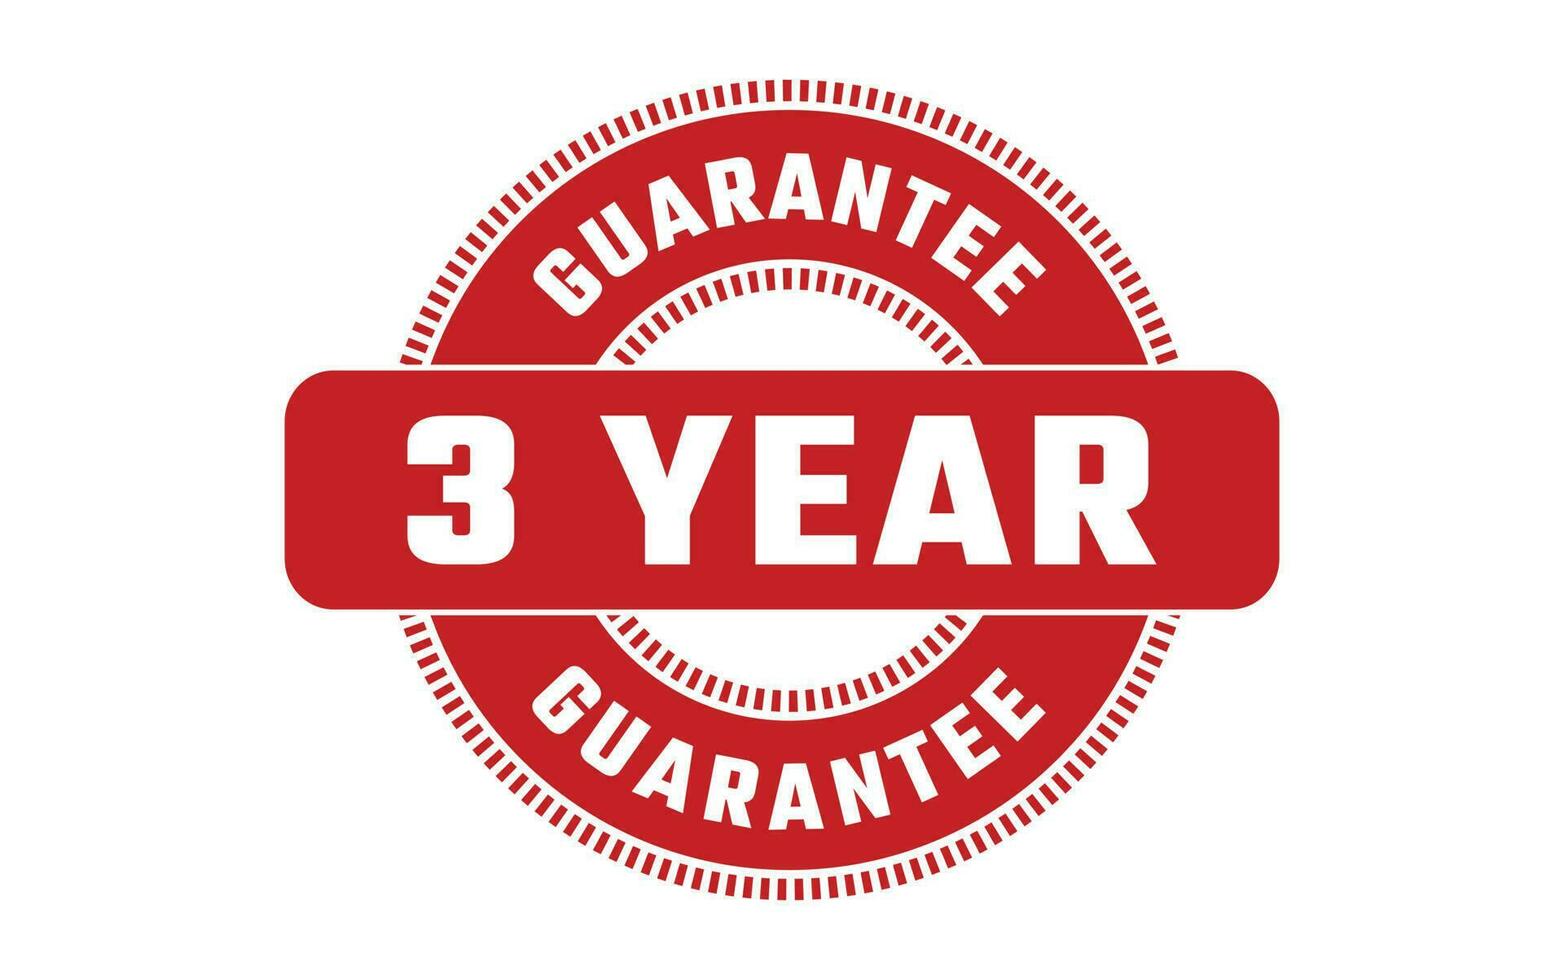 3 Year Guarantee Rubber Stamp vector